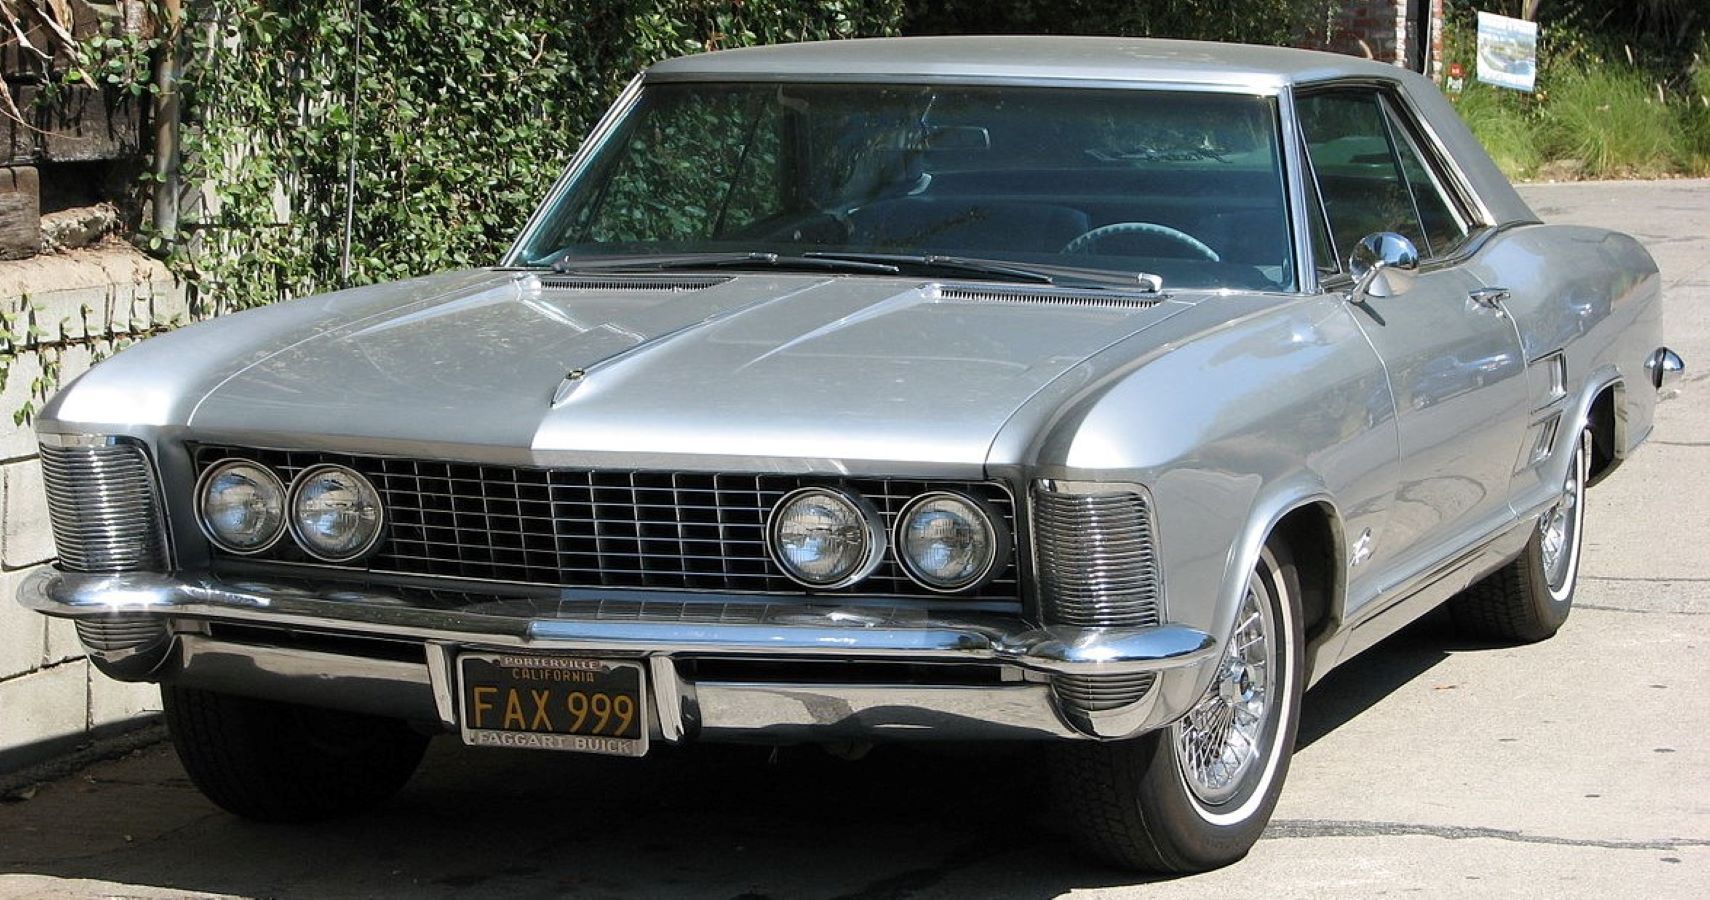 A front quarter view of a 1963 Buick Riviera.